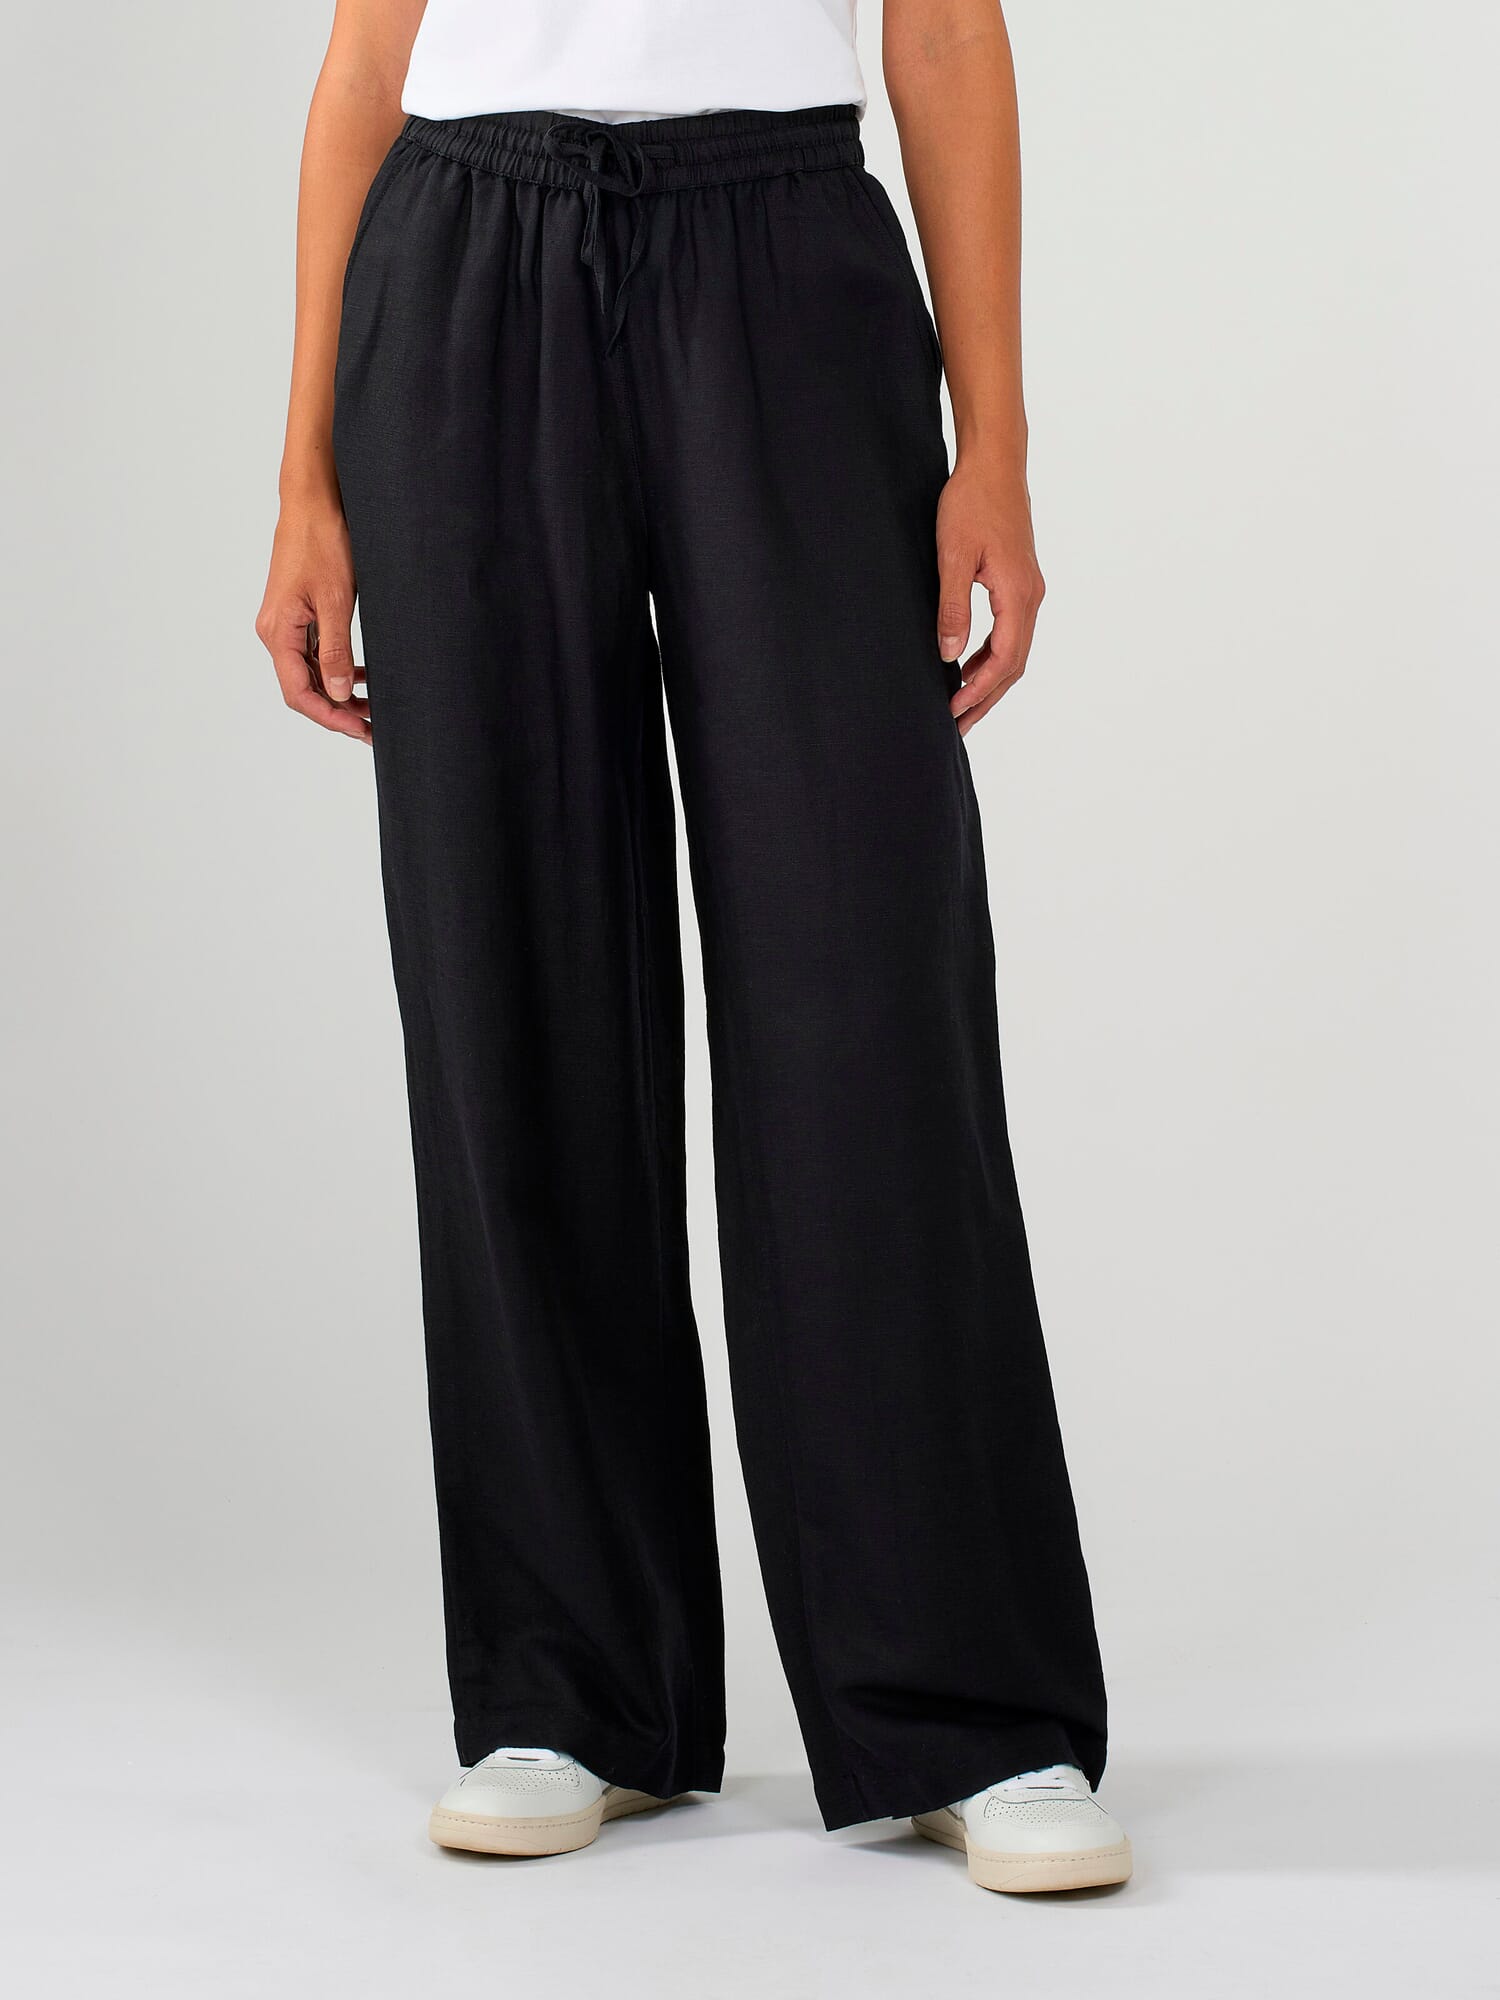 Buy Black Trousers & Pants for Women by Therebelinme Online | Ajio.com